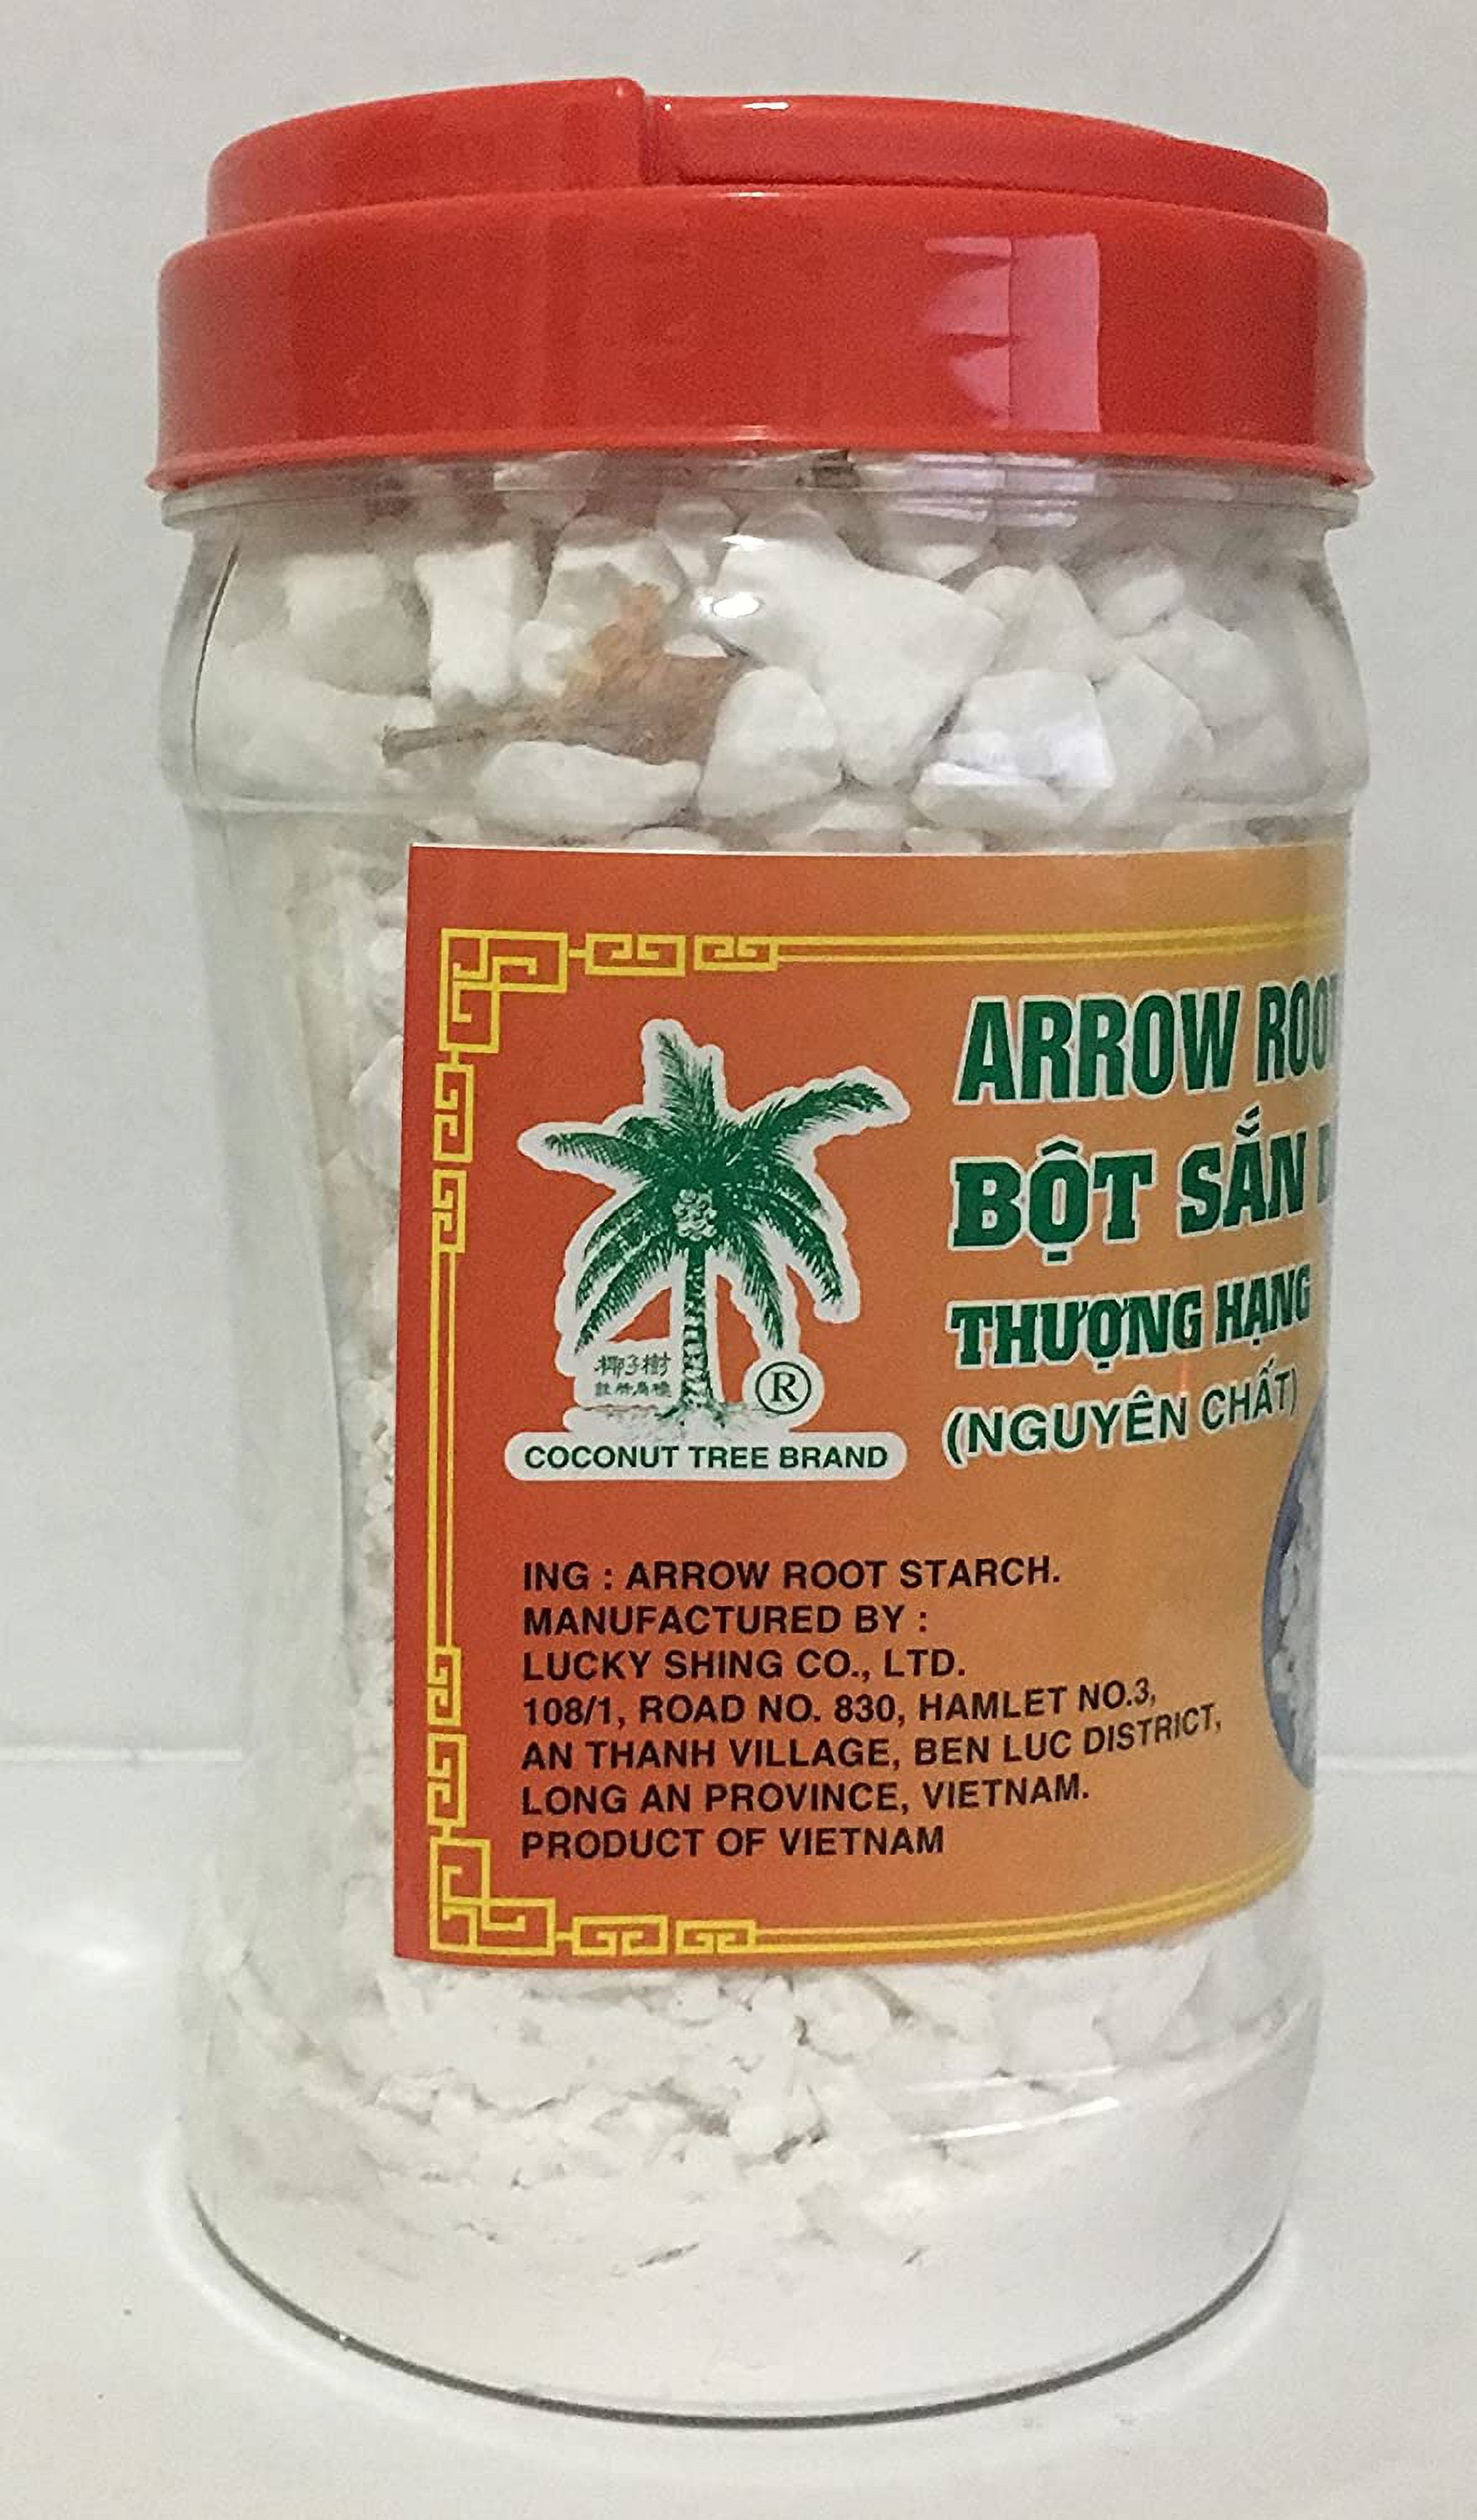 20oz Arrow Root Starch (Bot San Day) by Coconut Tree Brand, Pack of